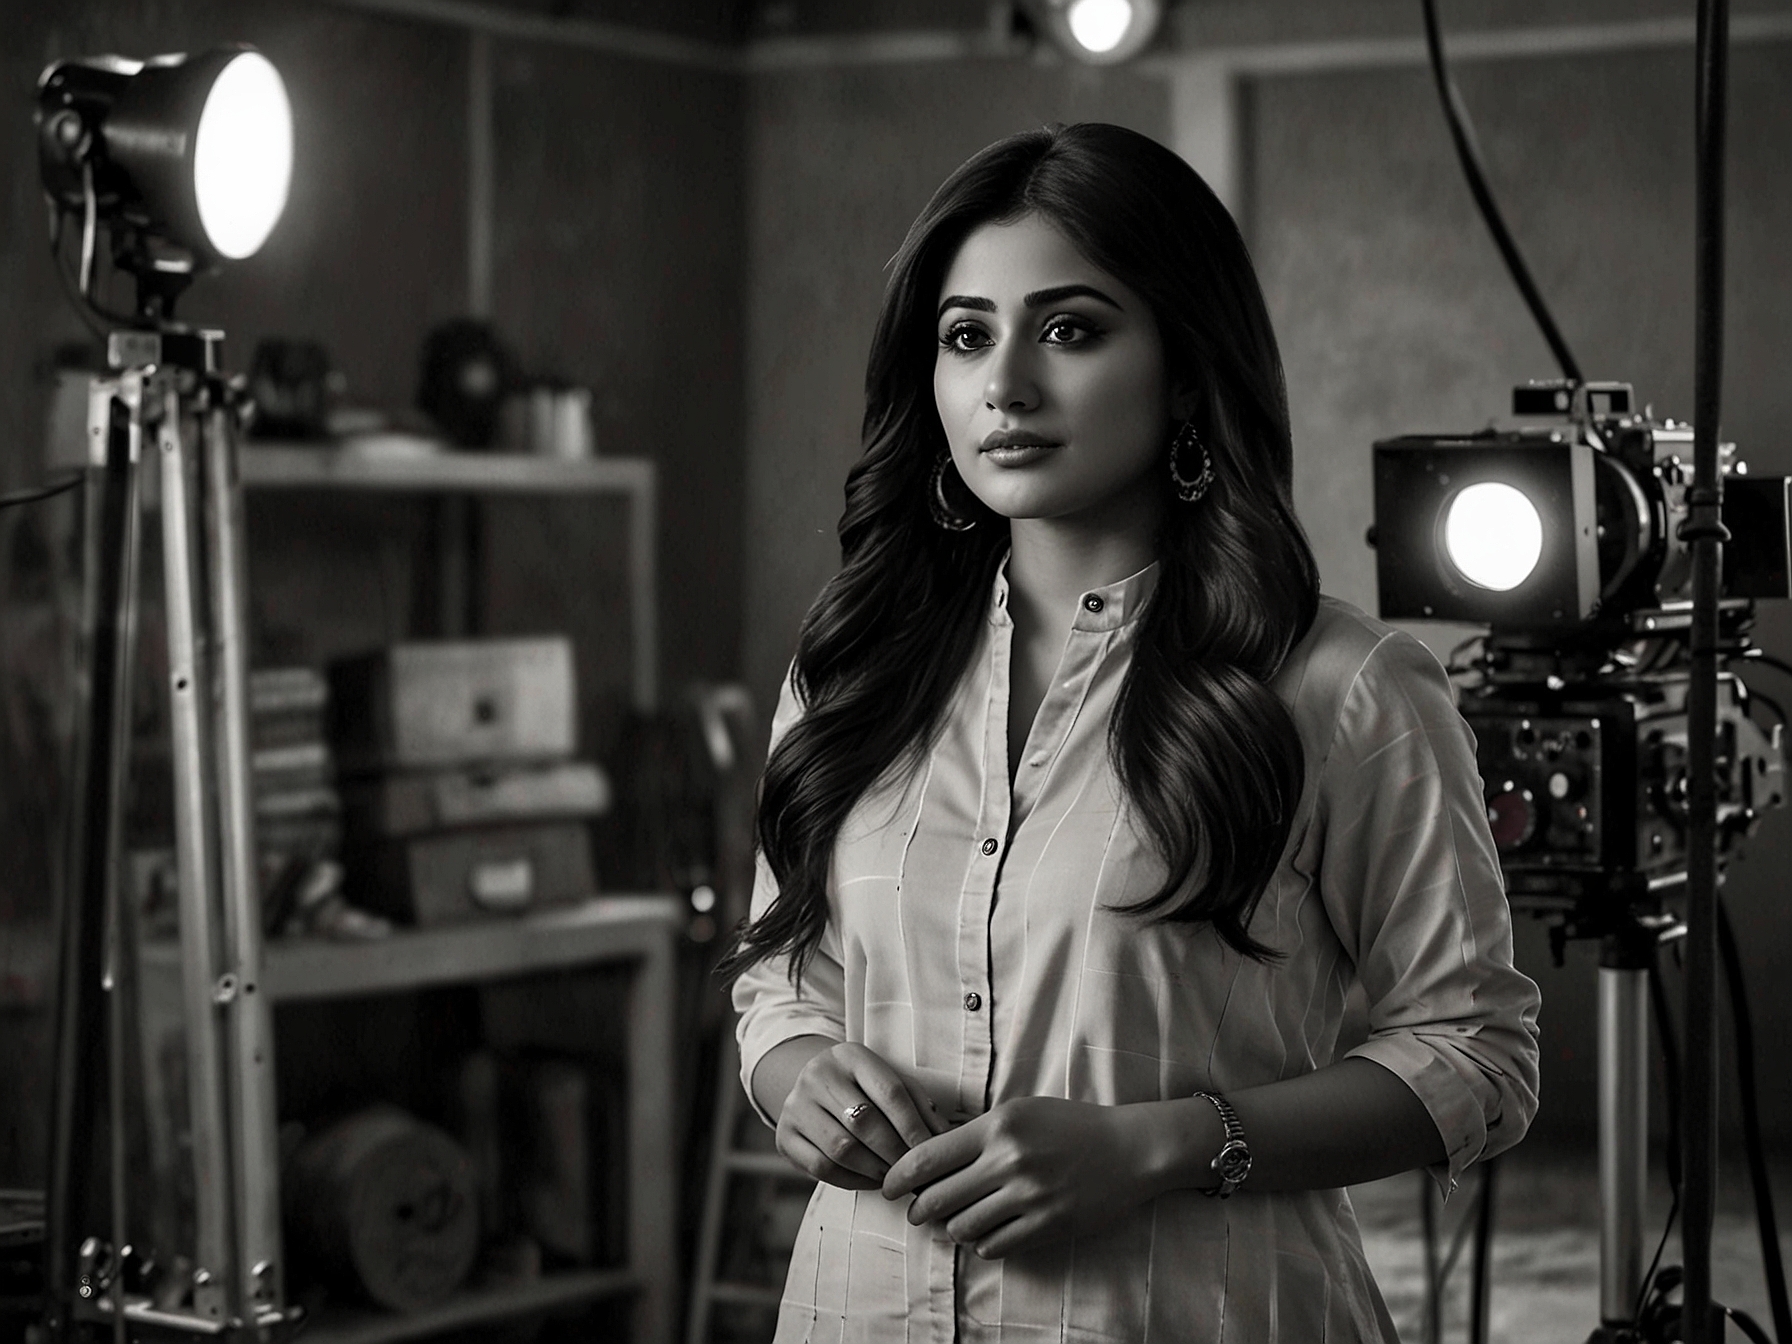 A behind-the-scenes shot of Kritika Kamra in character, ready for a pivotal scene in Matka King, surrounded by the filmmaking crew, showcasing the series' high production values.